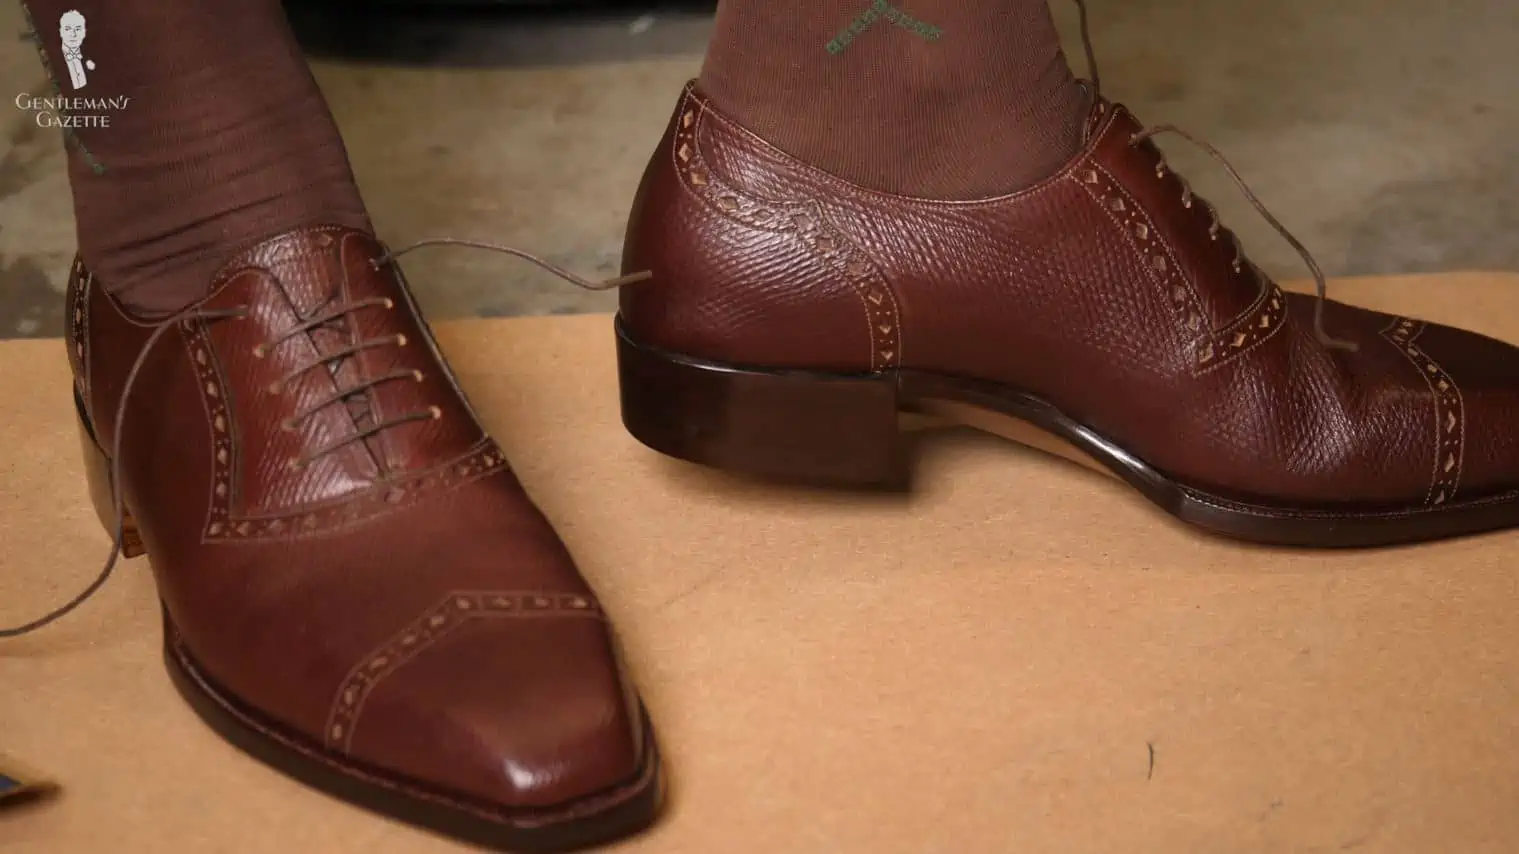 The slimmer soles on Raphael’s bespoke shoes (Pictured: Mid Brown Socks with Green and Cream Clocks in Cotton from Fort Belvedere)